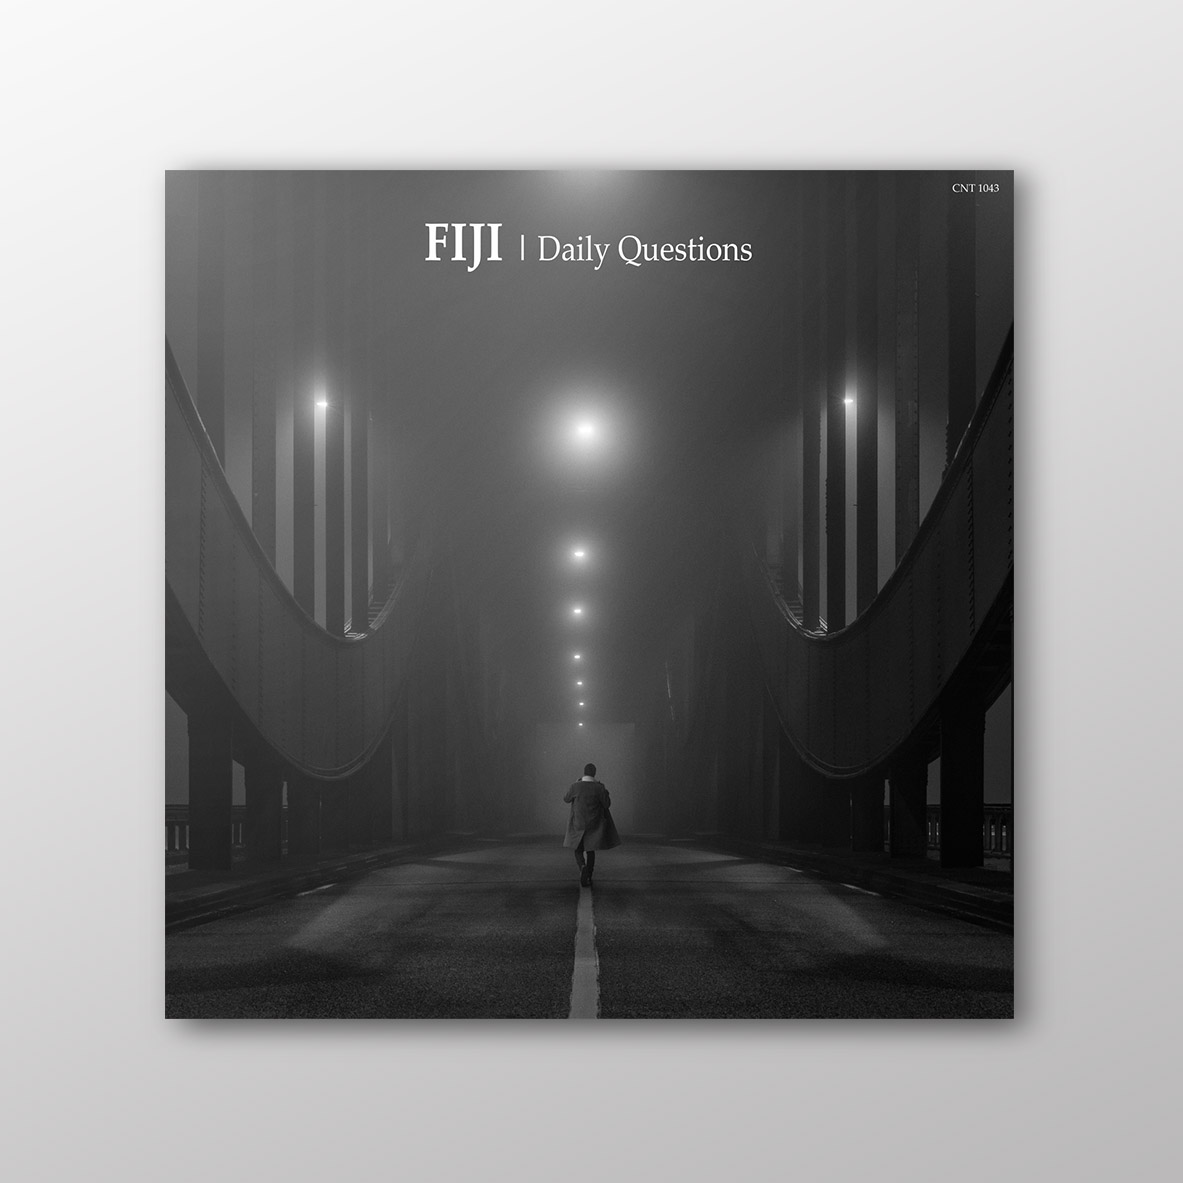 Fiji - Daily Questions